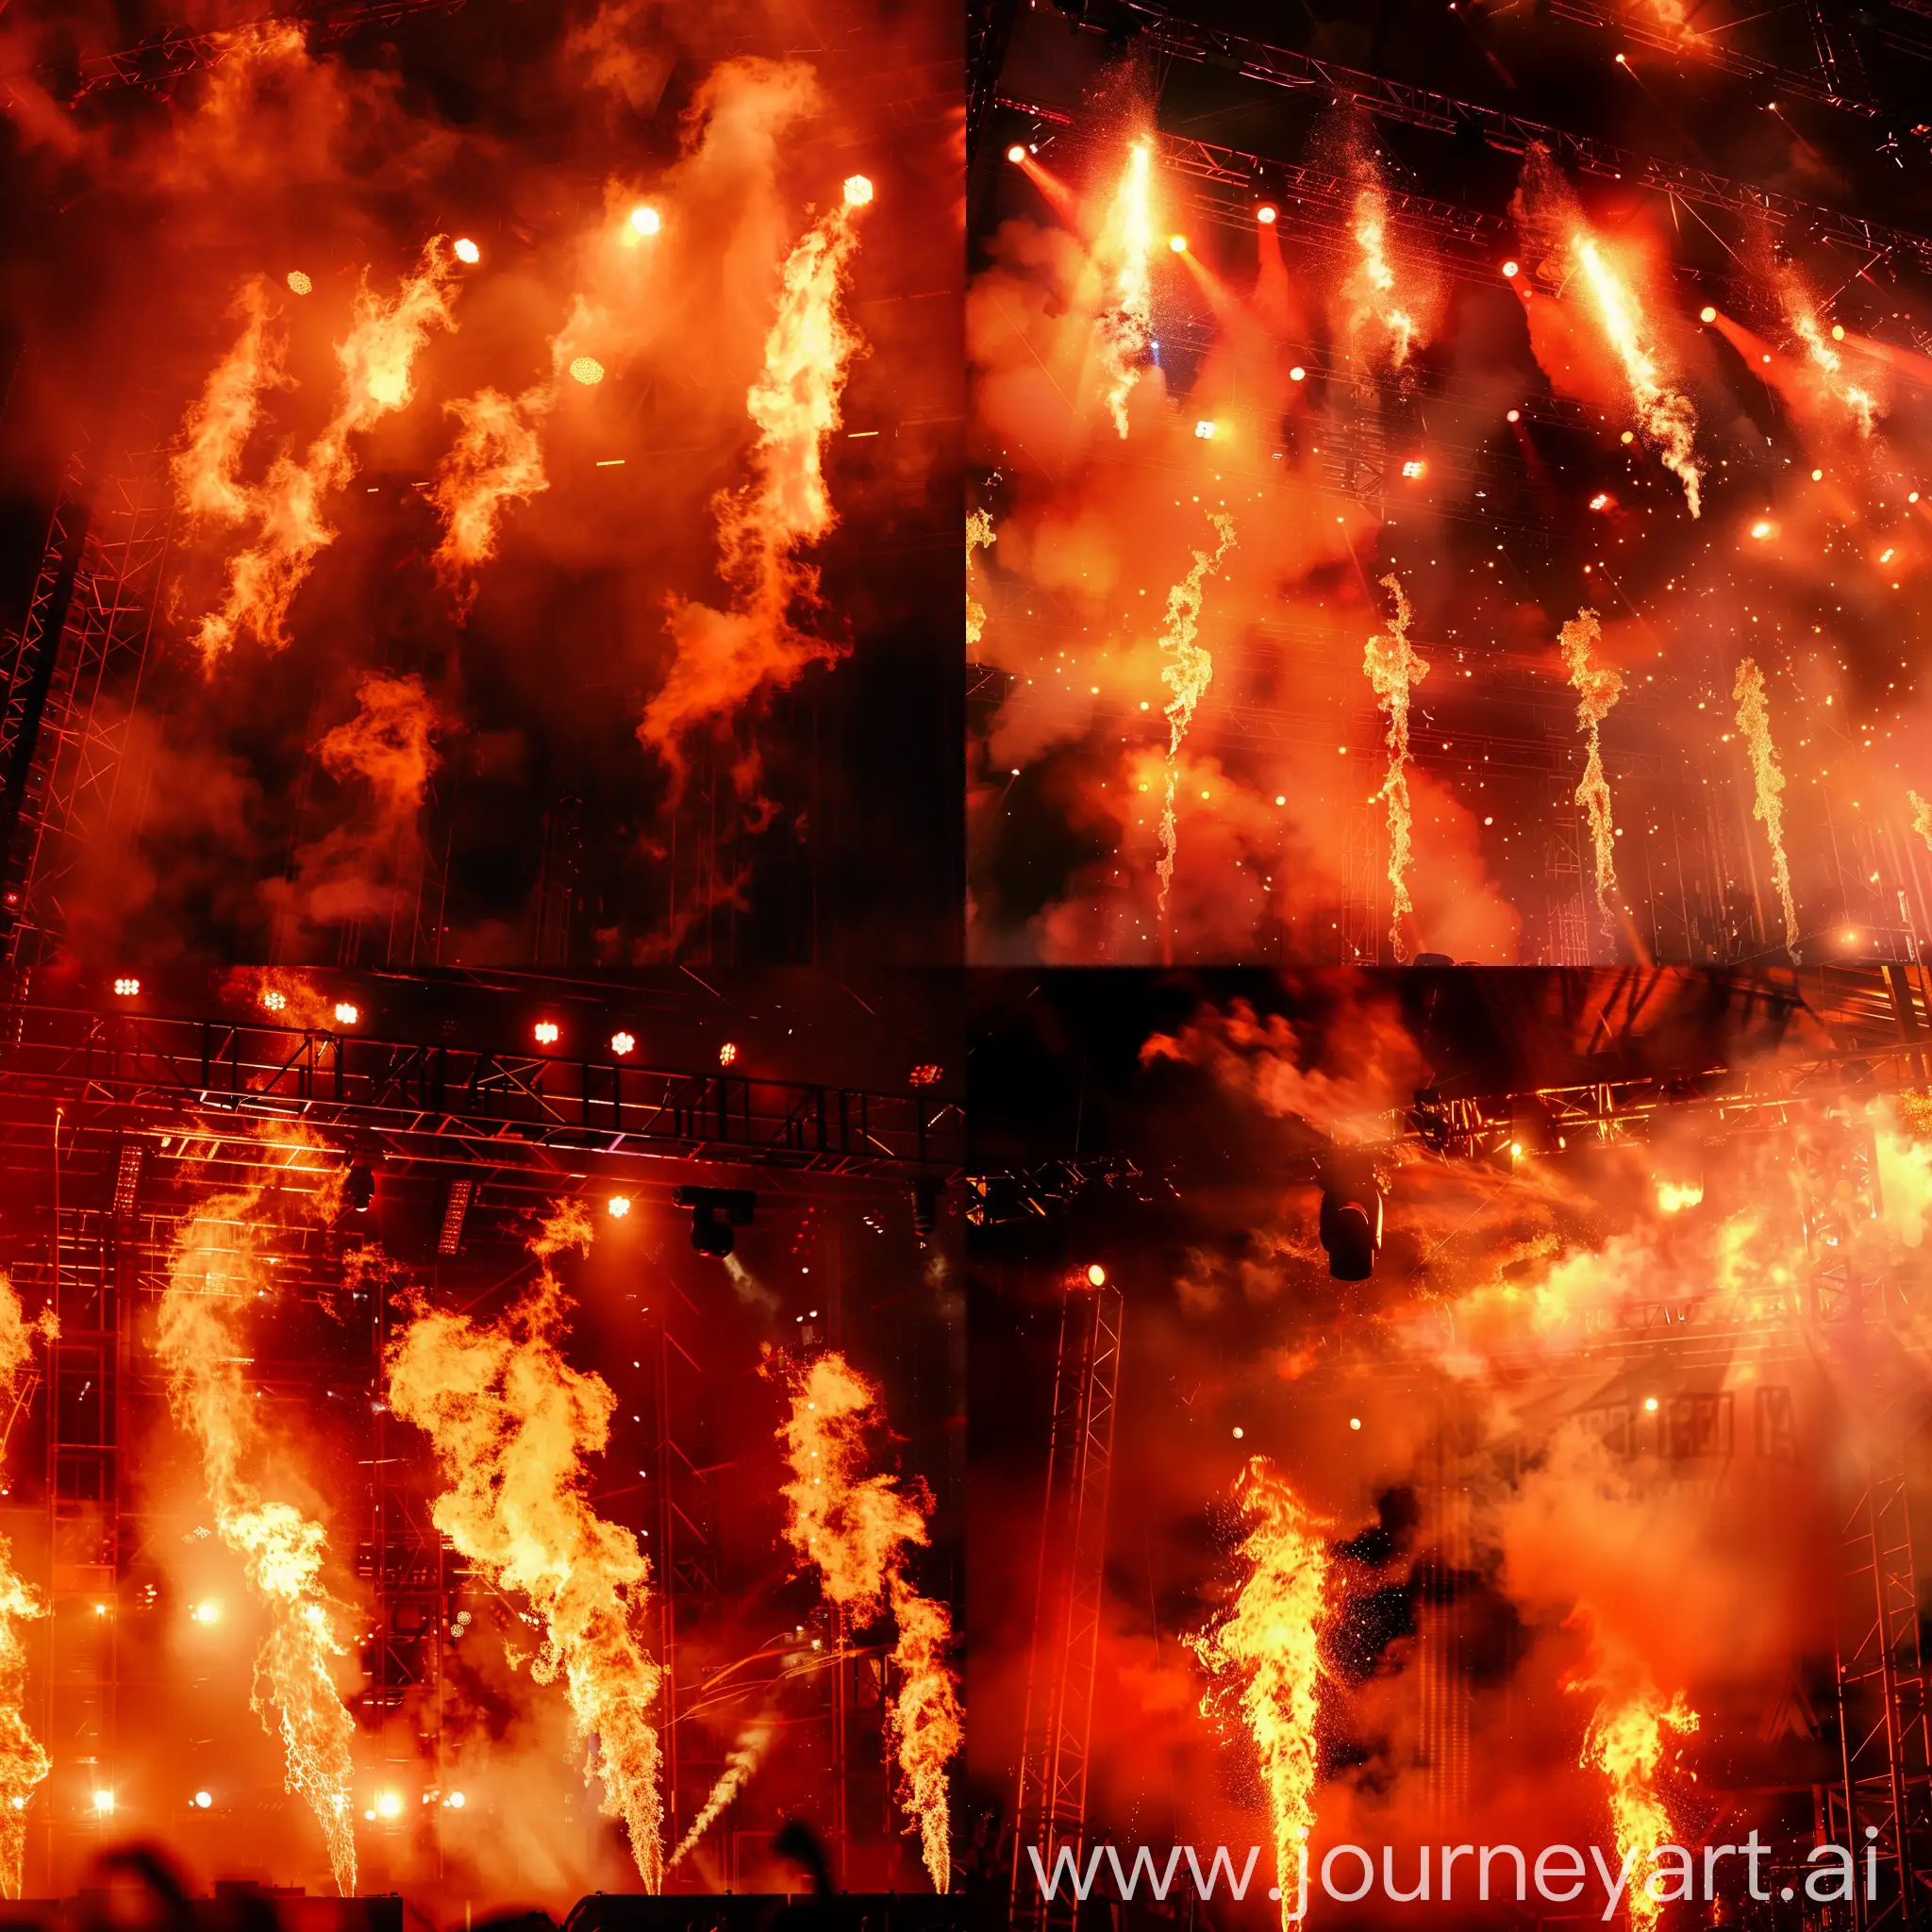 An intense, fiery rock concert background with dramatic flames and smoke creating a high-energy atmosphere. The scene is illuminated by dynamic stage lights in red and orange hues, casting strong shadows and adding depth. The setting is an outdoor rock festival at night, with a hint of a cheering crowd visible in the dimly lit foreground.